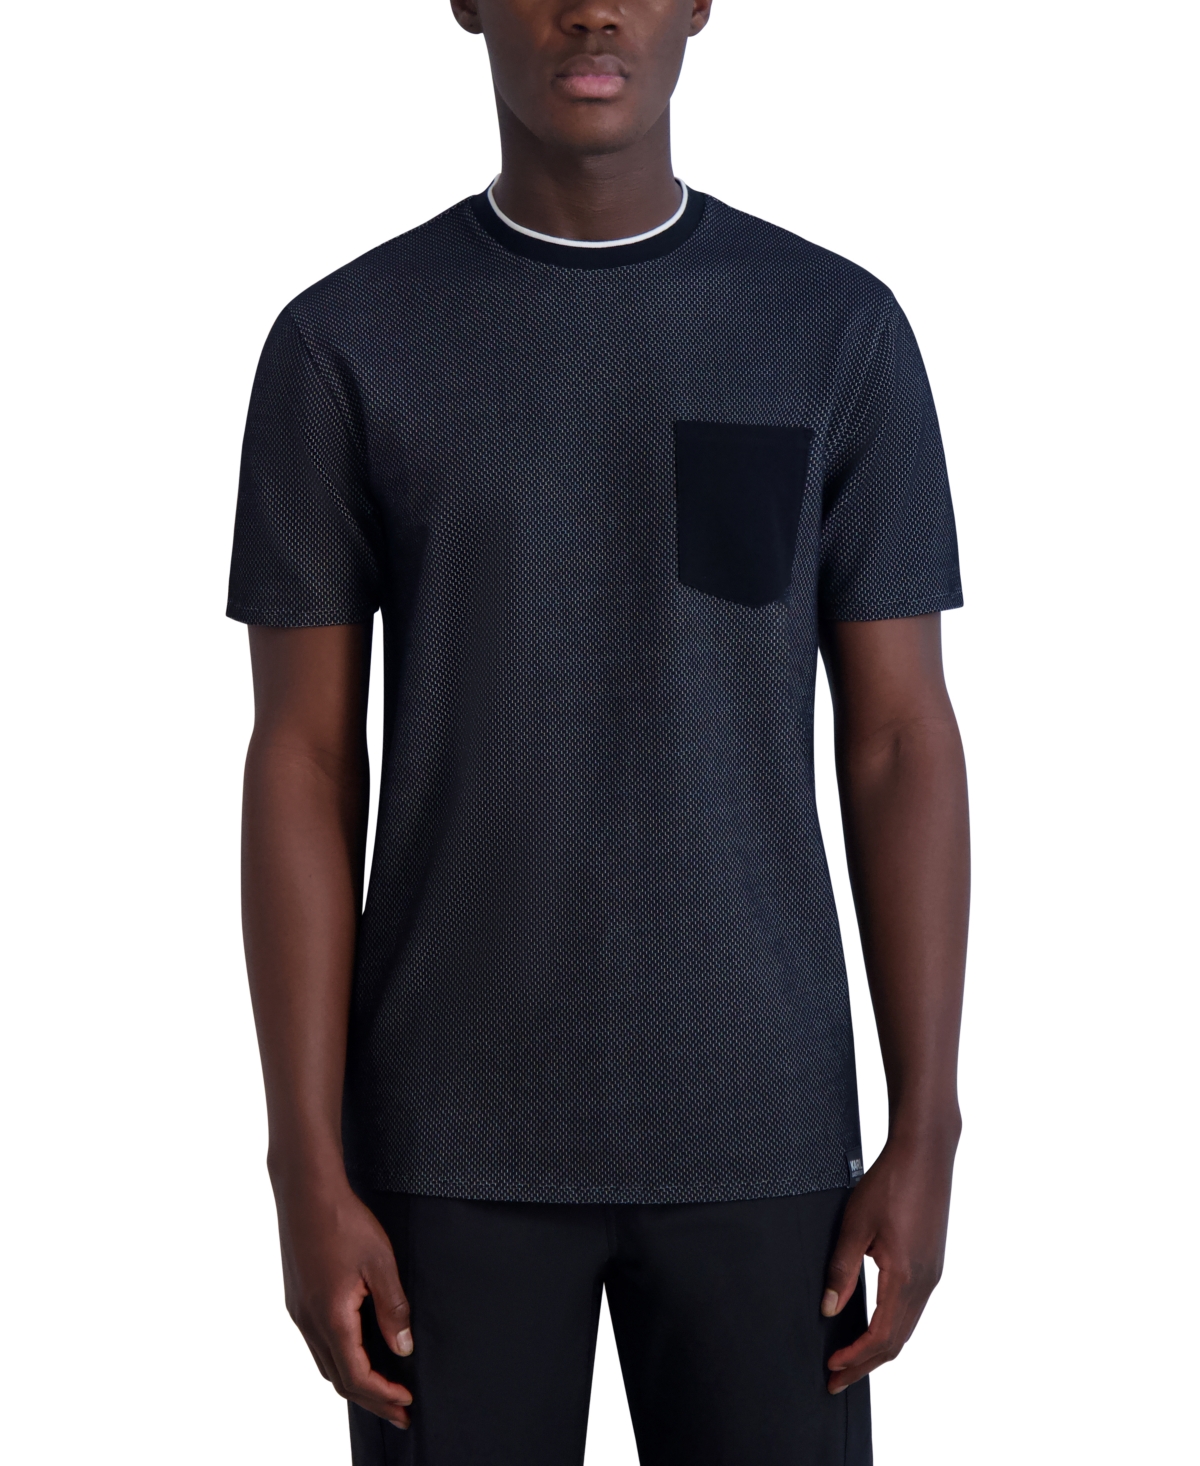 Men's Slim-Fit Textured Pocket T-Shirt, Created for Macy's - Black